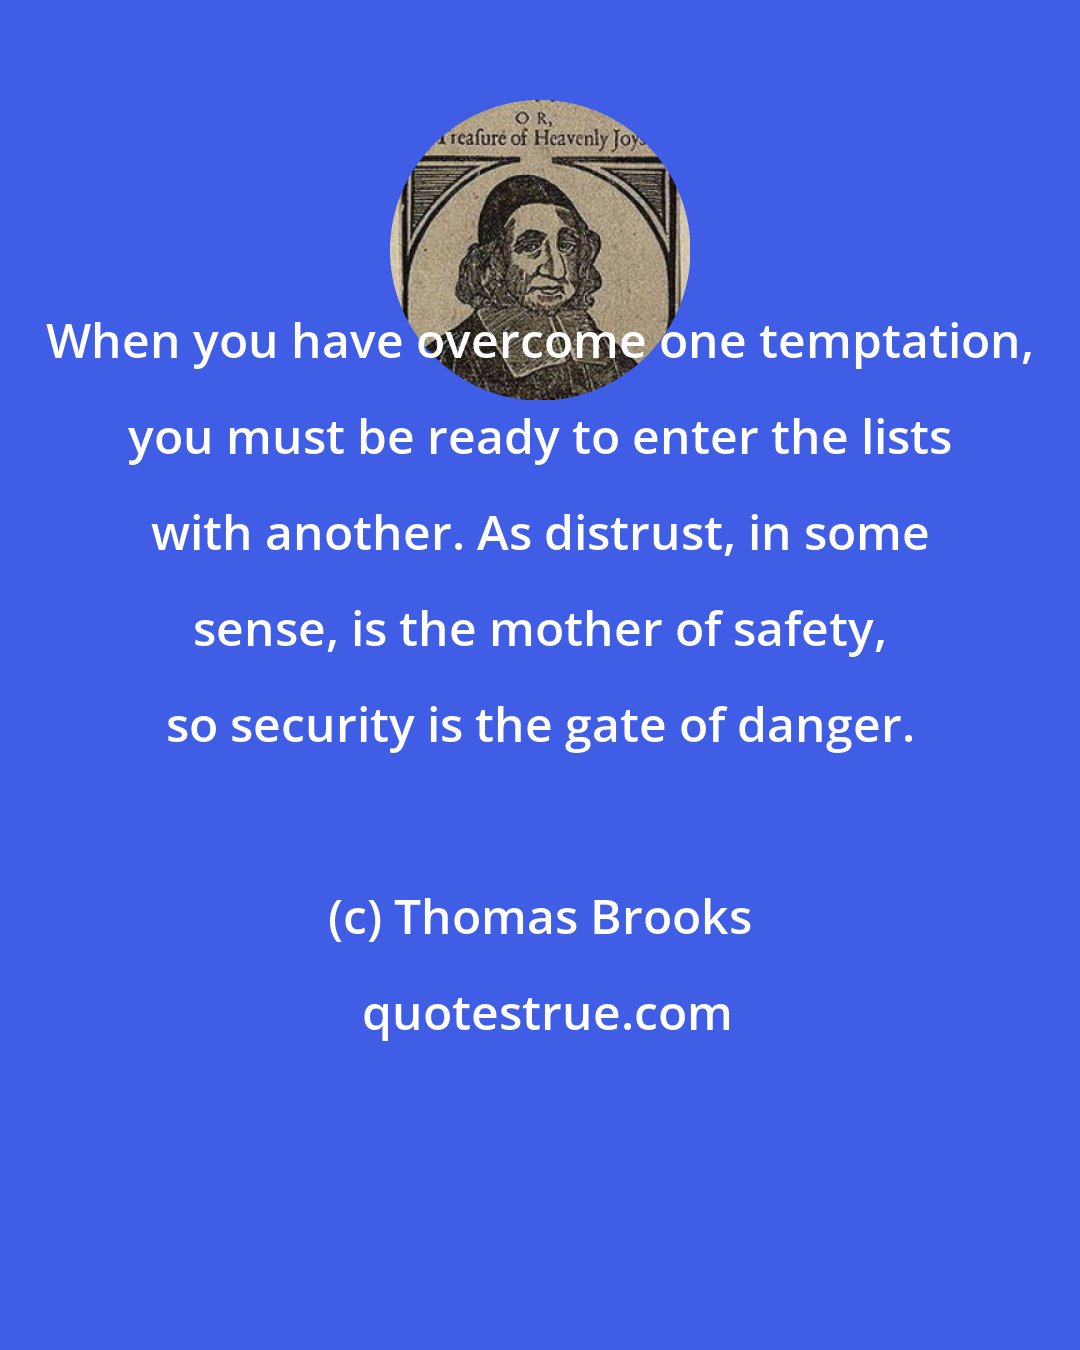 Thomas Brooks: When you have overcome one temptation, you must be ready to enter the lists with another. As distrust, in some sense, is the mother of safety, so security is the gate of danger.